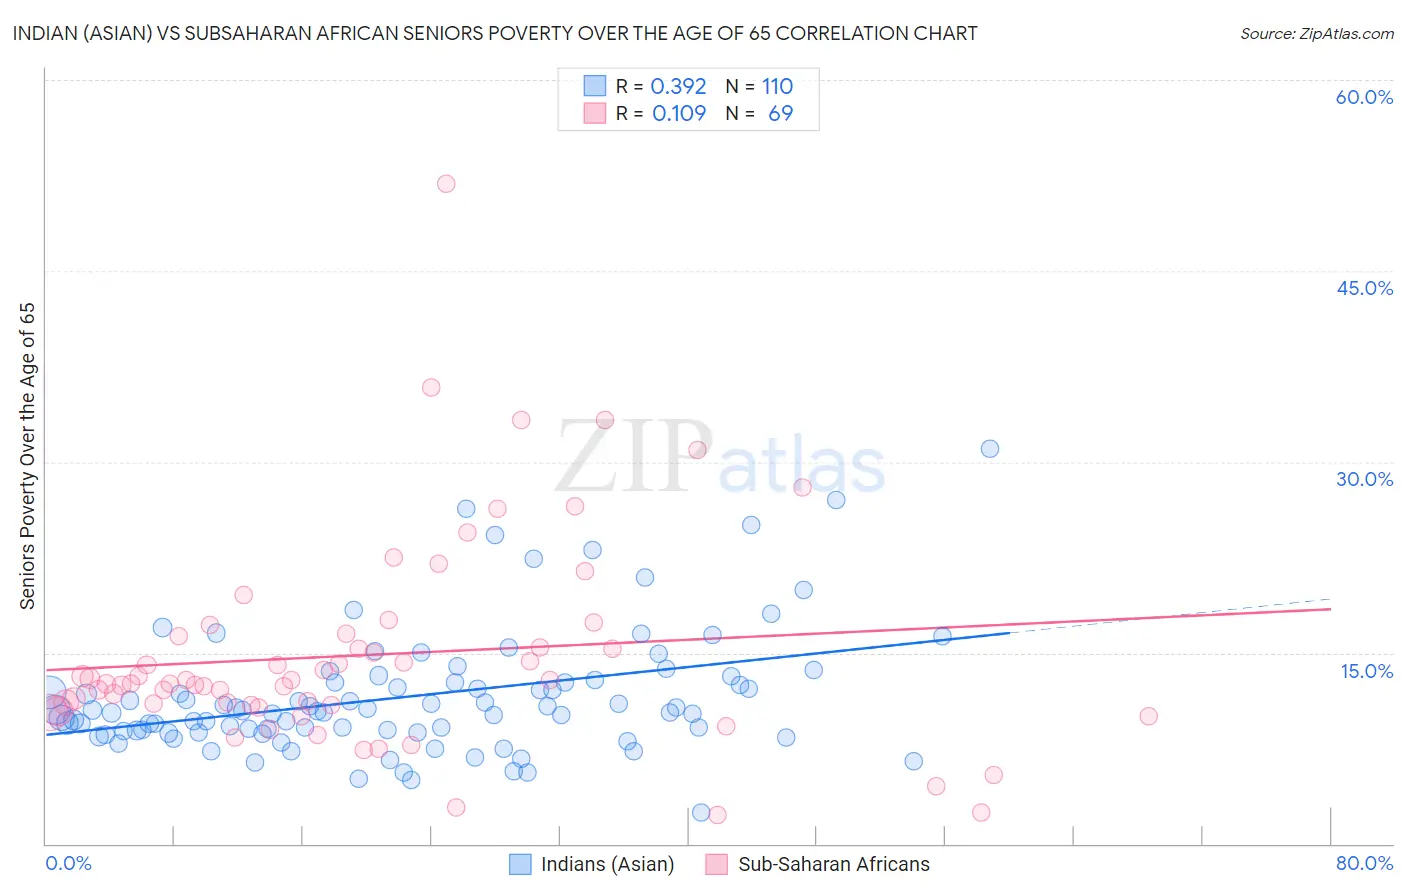 Indian (Asian) vs Subsaharan African Seniors Poverty Over the Age of 65